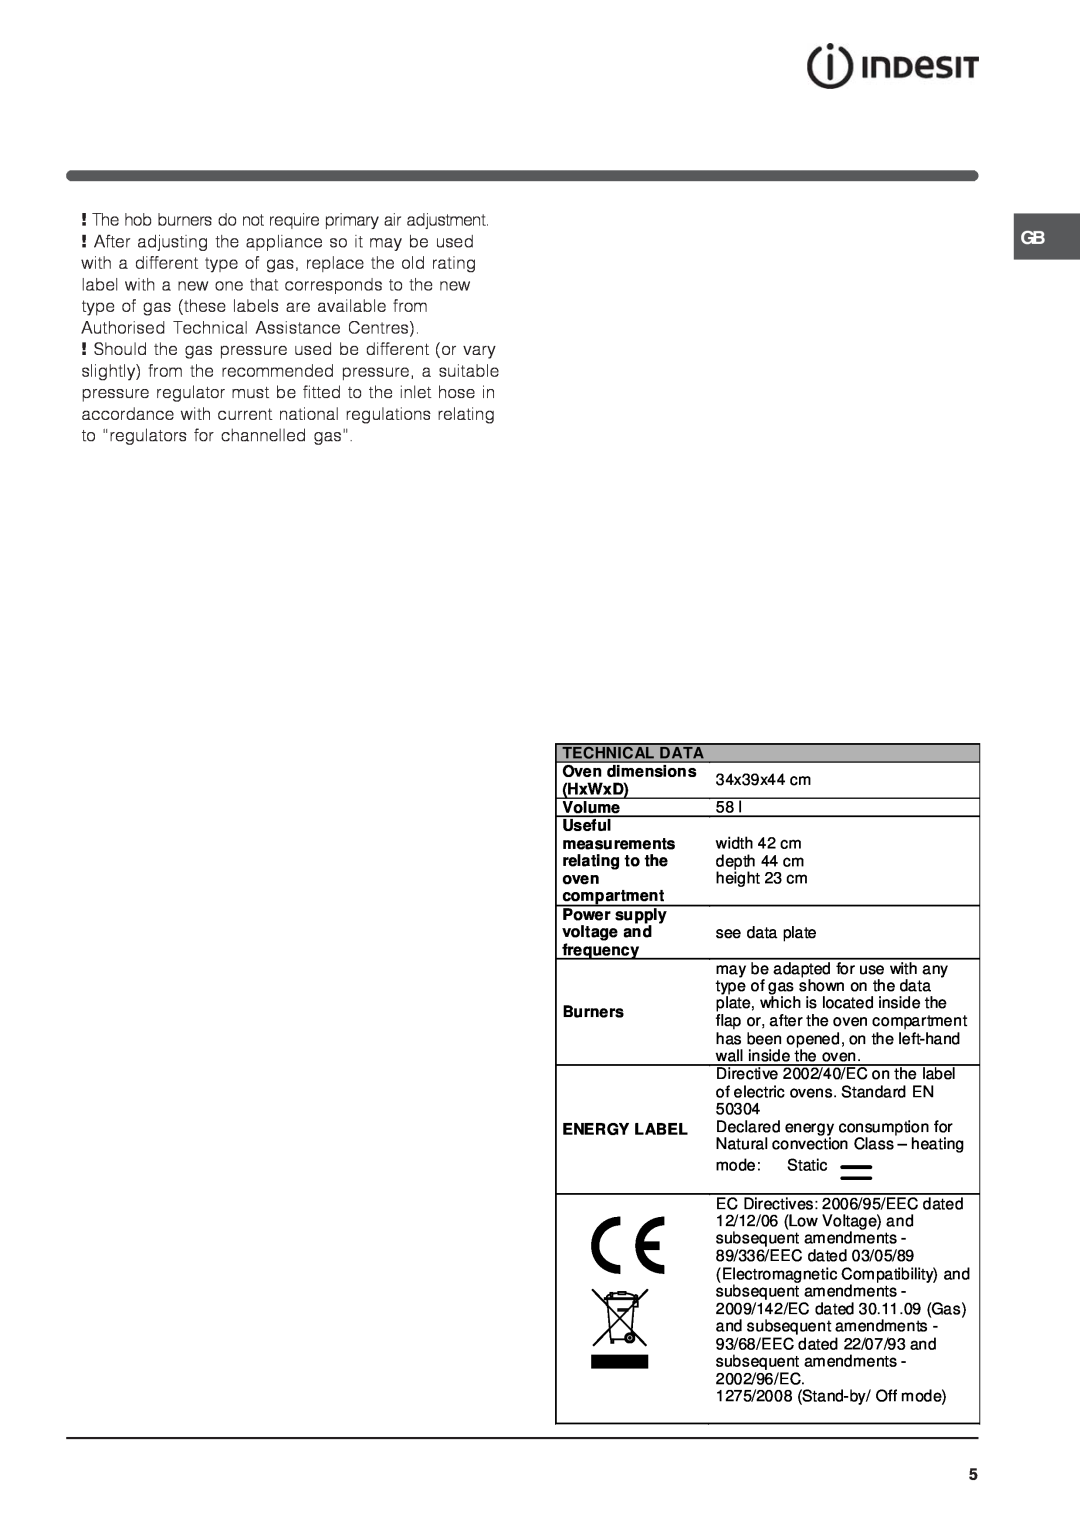 Indesit IS50D1 specifications Technical Data 